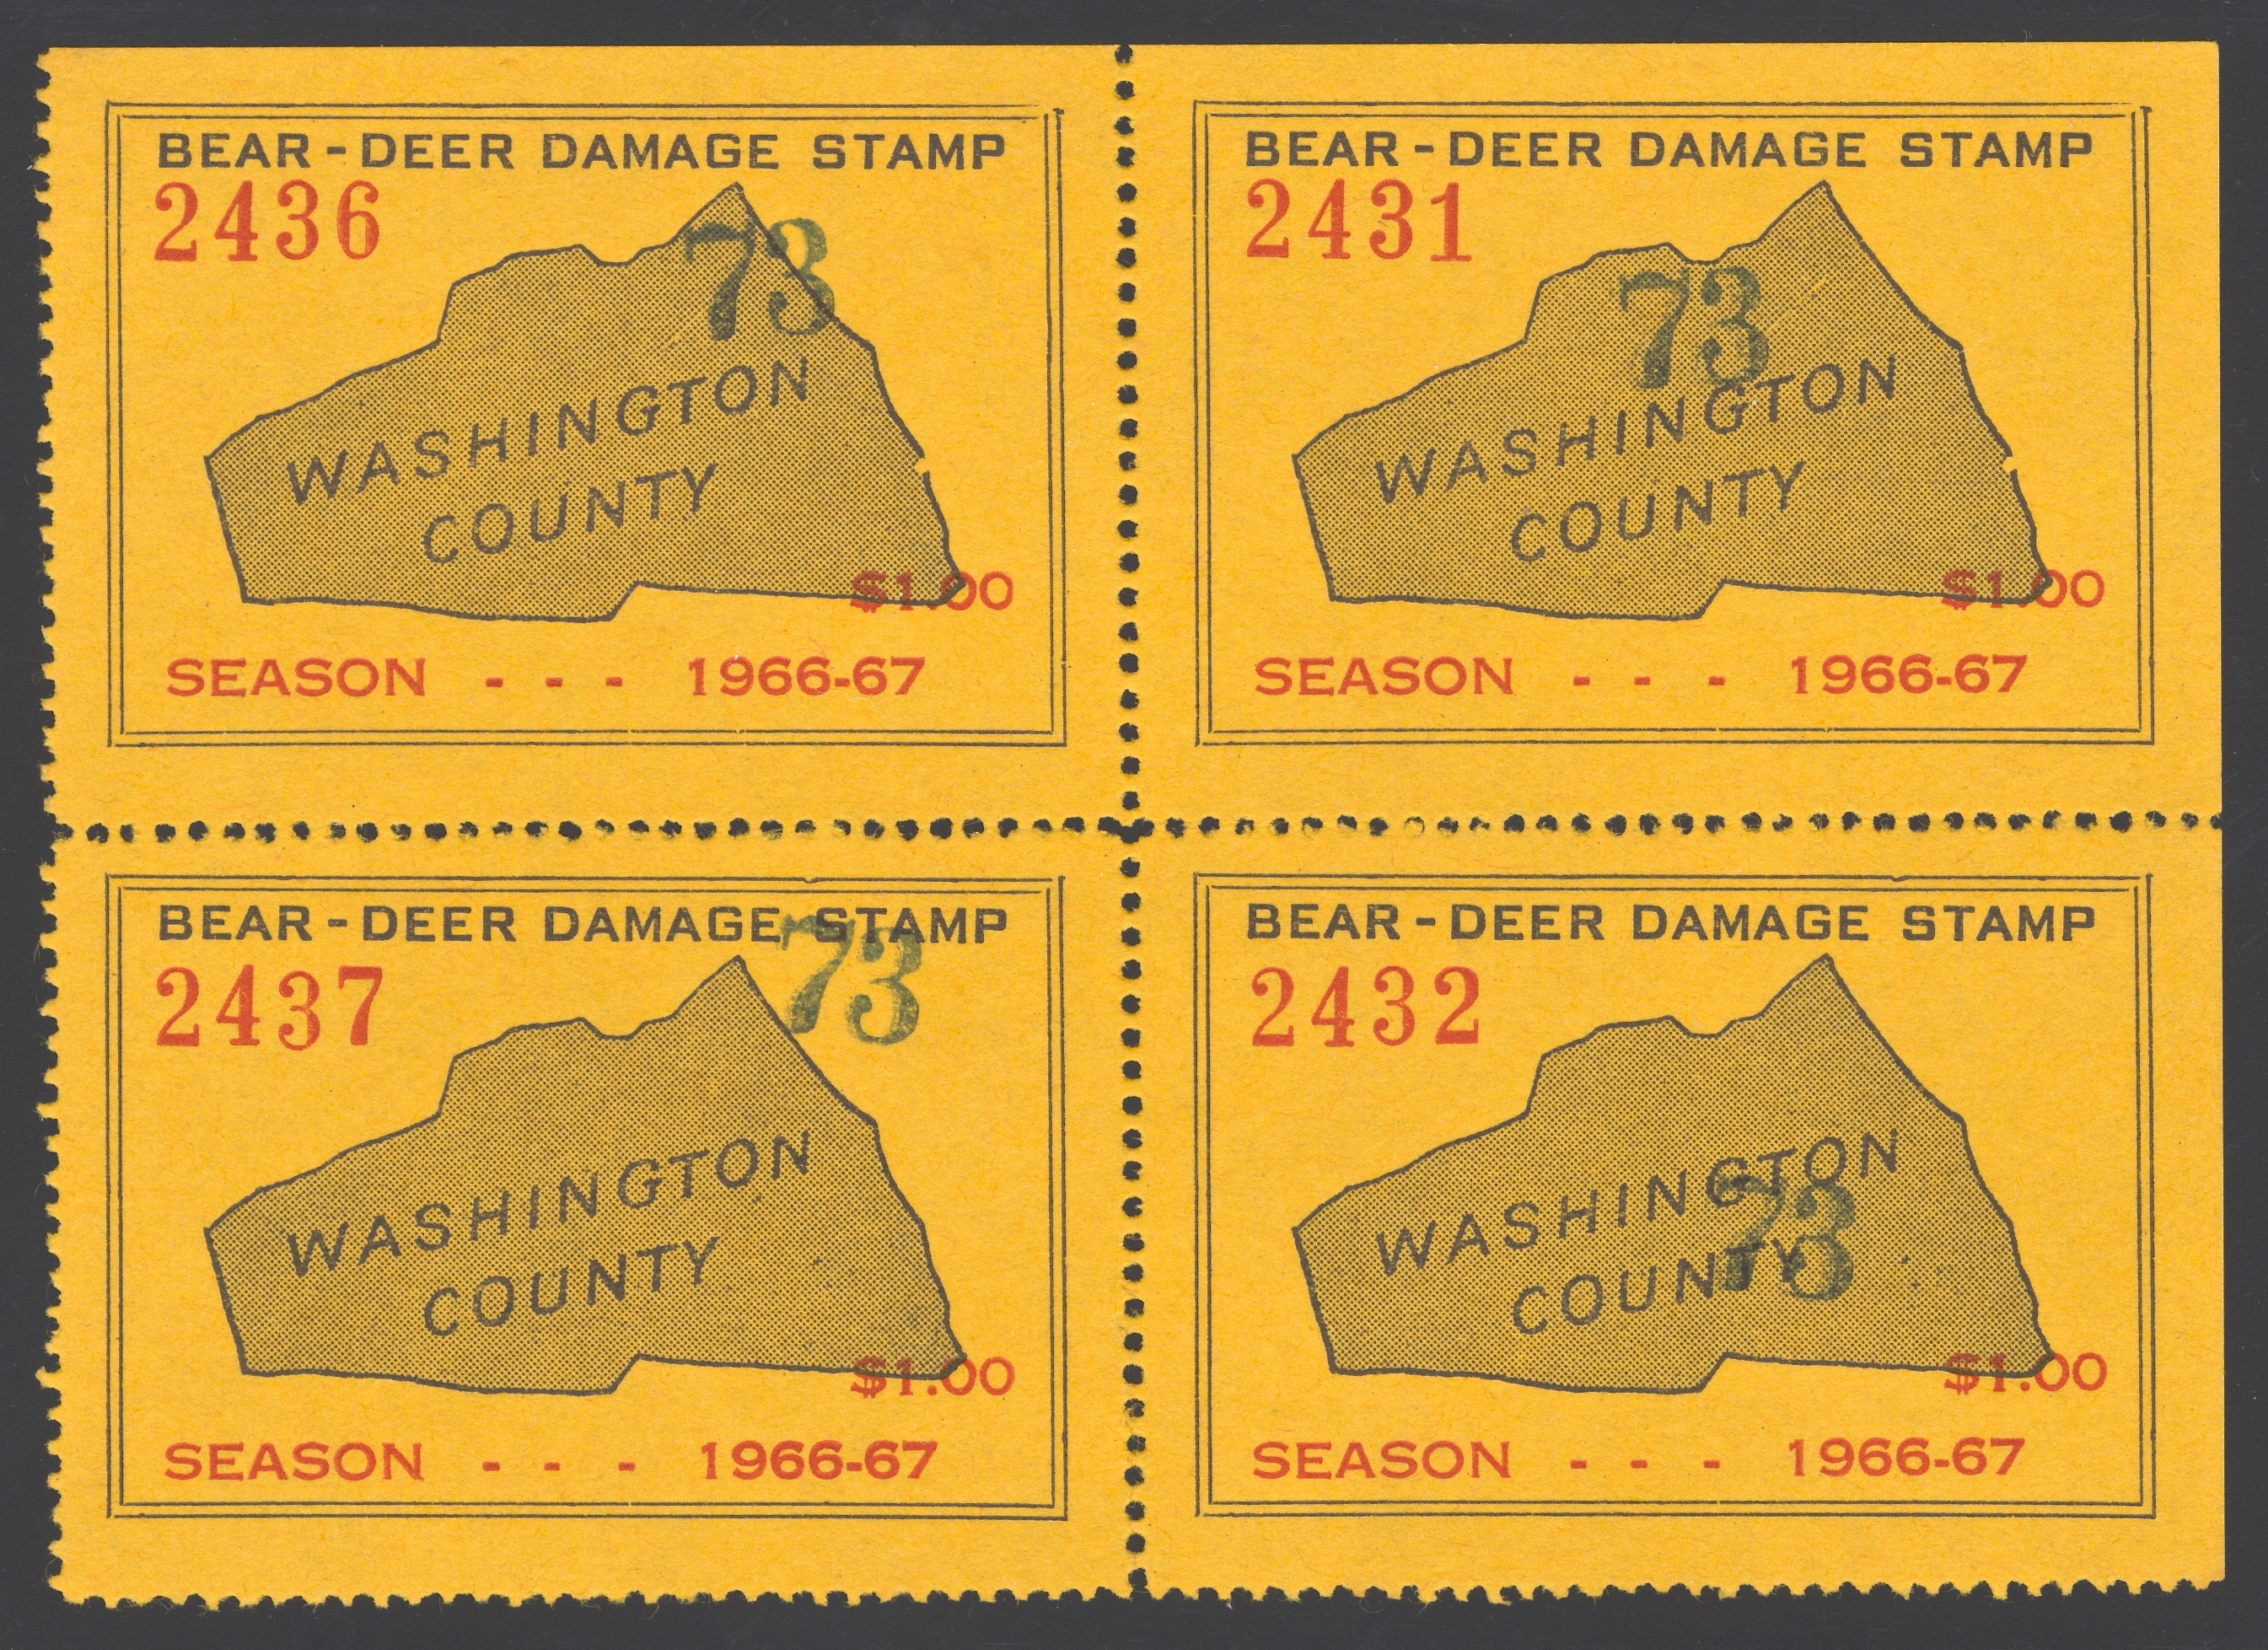 1973-74 Provisional Washington County, Virginia Block of Four (Year Date Rubber-Stamped on 1966-67 Issue)